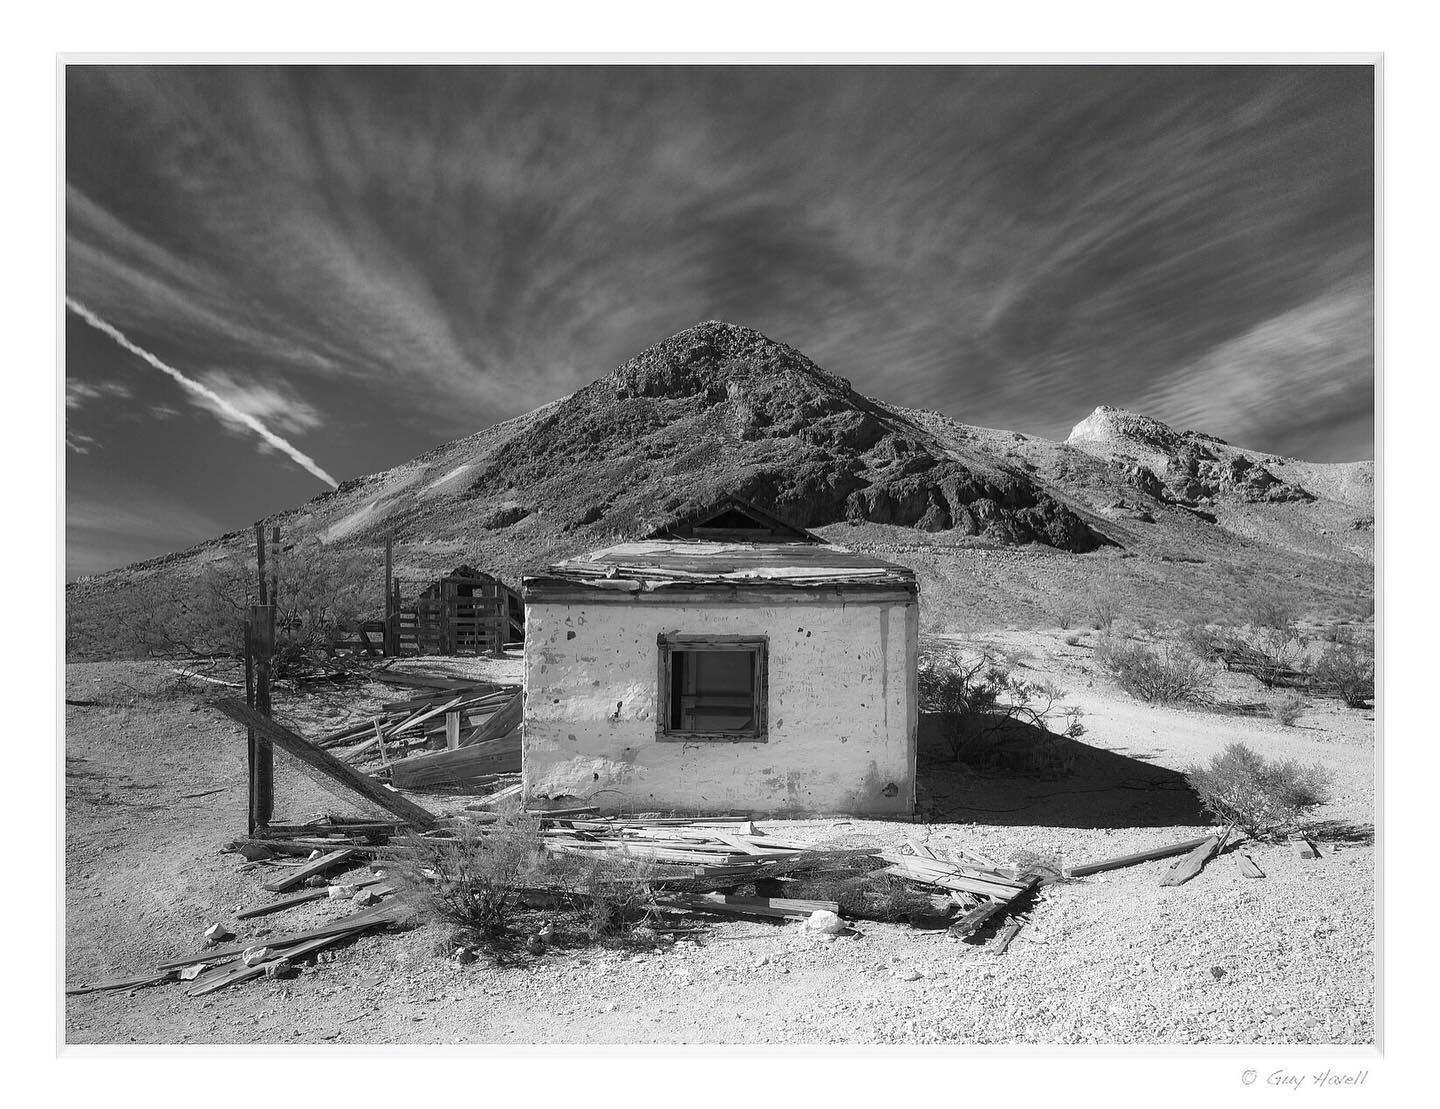 Rhyolite, Nevada. (2017) &copy; Guy Havell.

#bwphotography #bnw_planet #ghosttown #nv #deathvalley #blackandwhitephotography #mono #builtenvironment #landscapephotography #newtopographics #cloudporn #mediumformat #alpacameras #sheds #zonesystem #aba